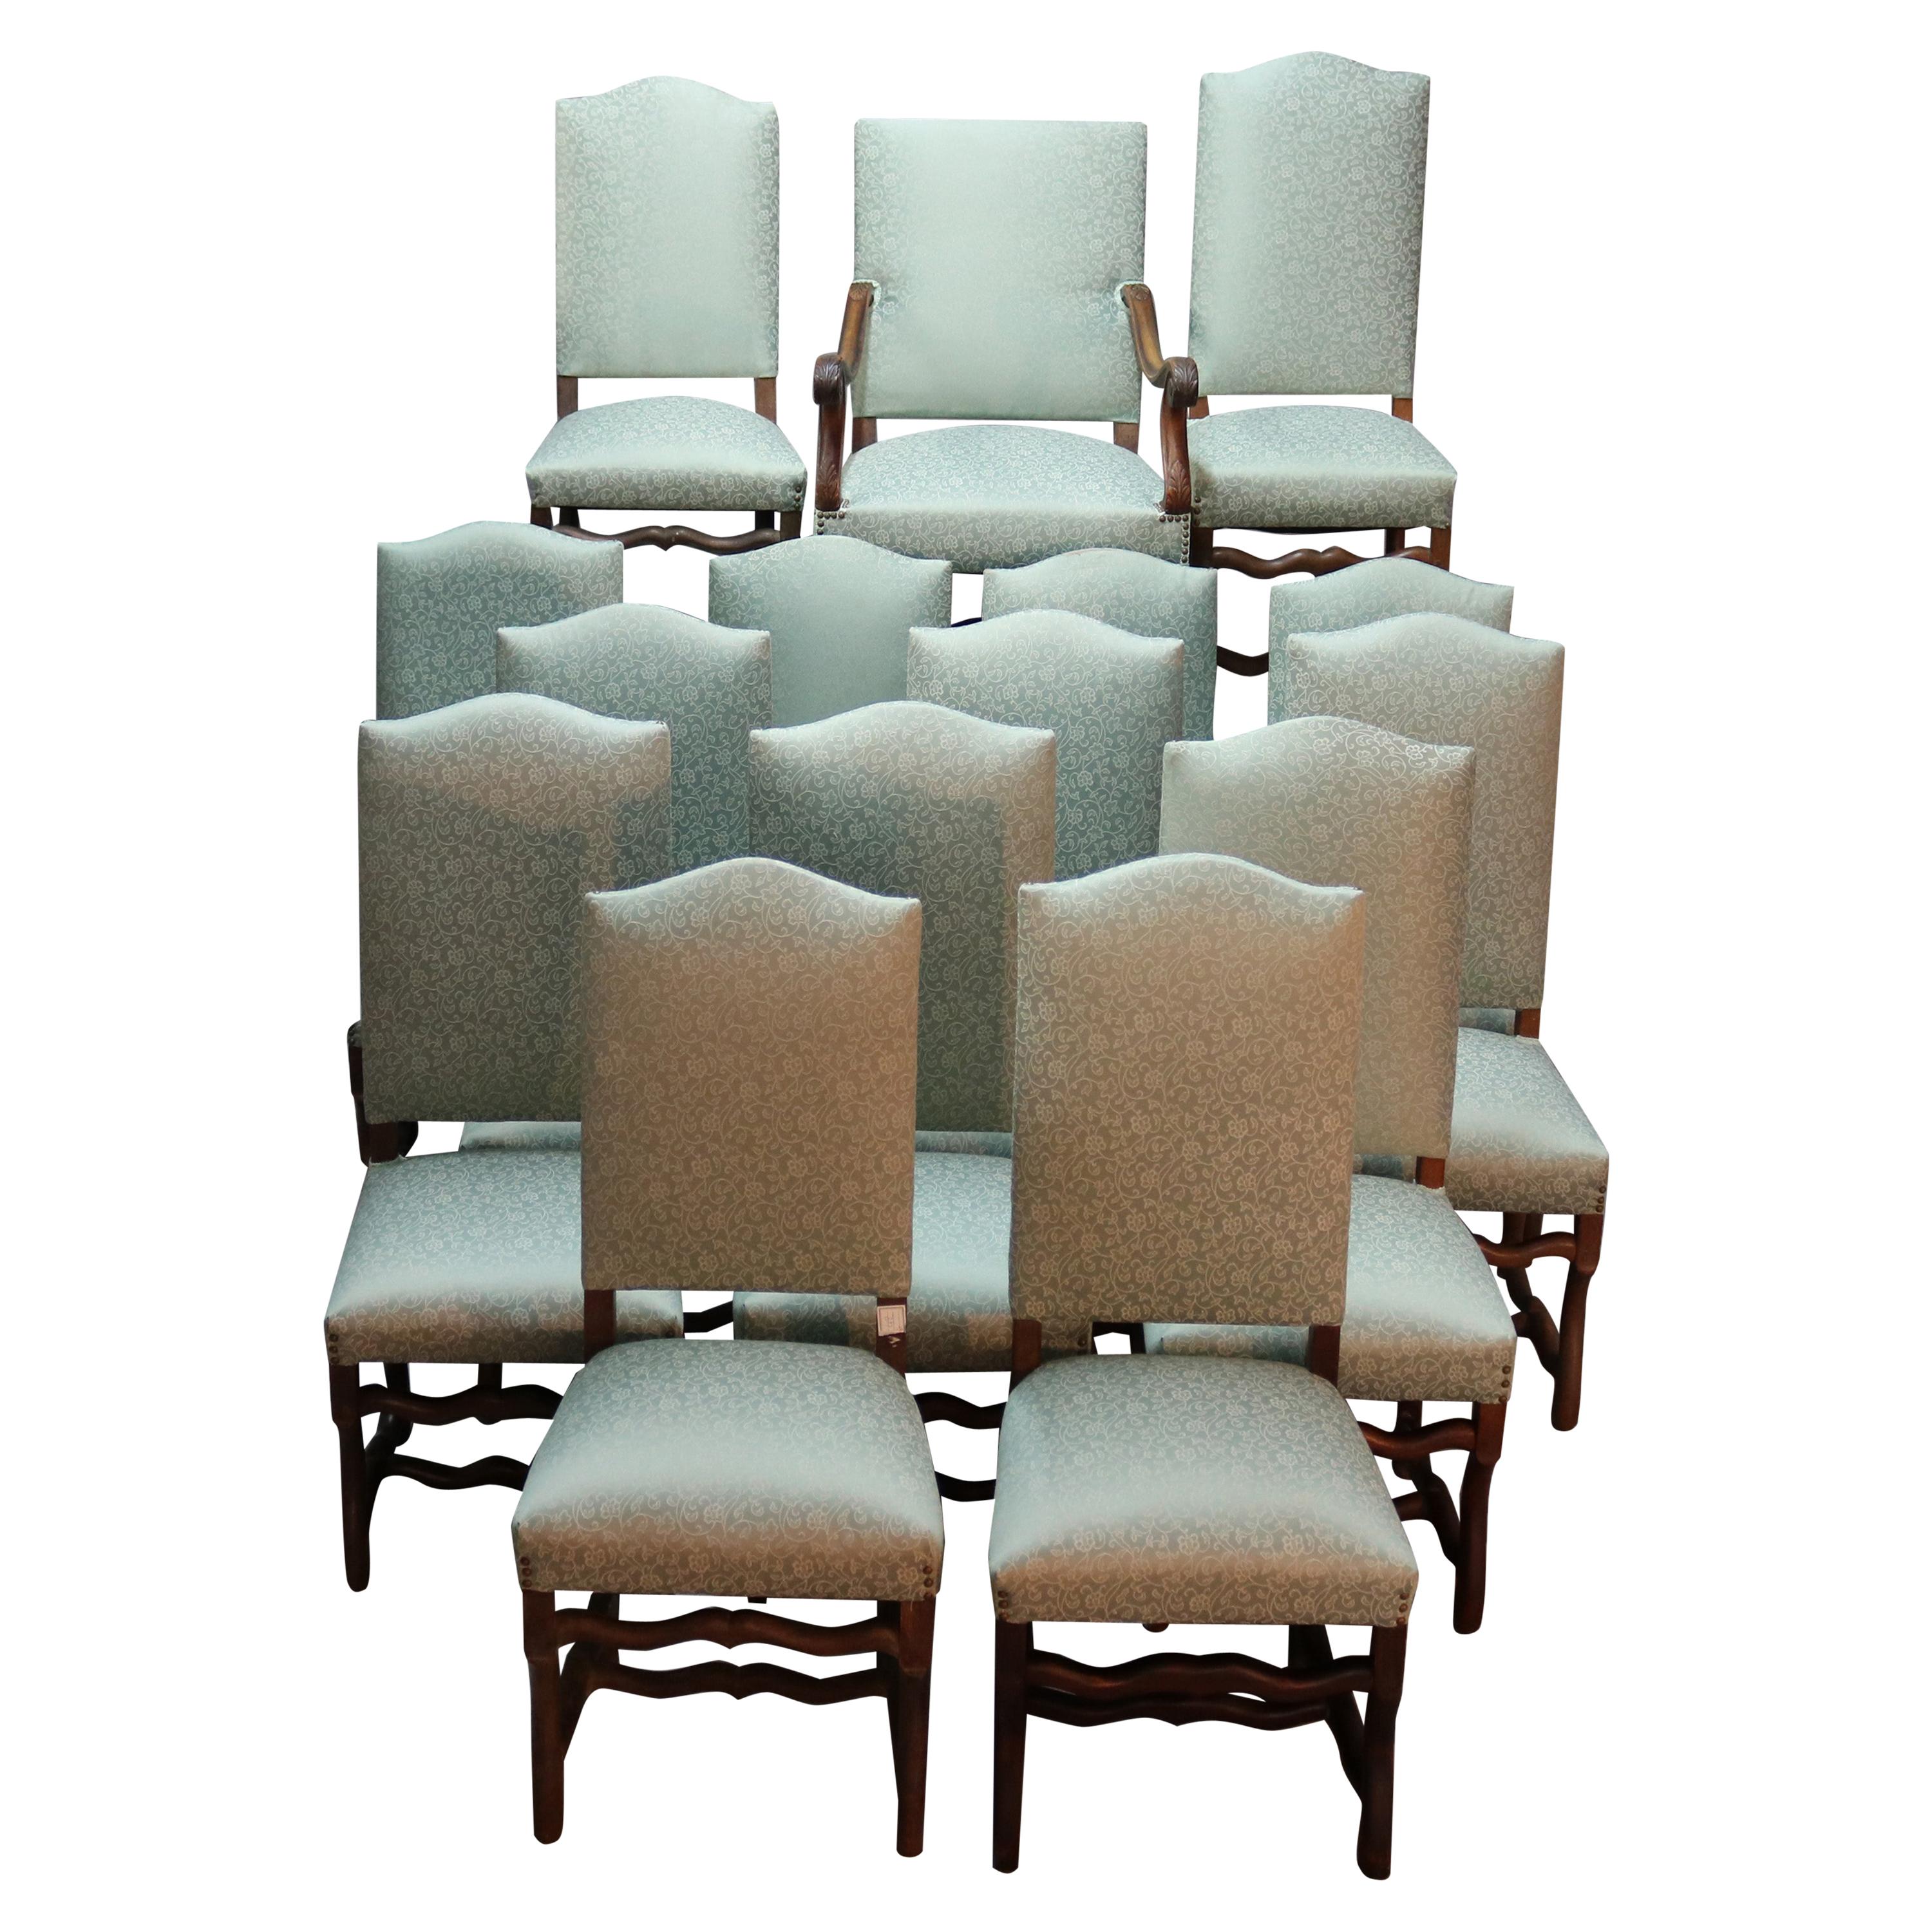 15 Antique French Renaissance Tall Back Upholstered Dining Chairs, 19th Century